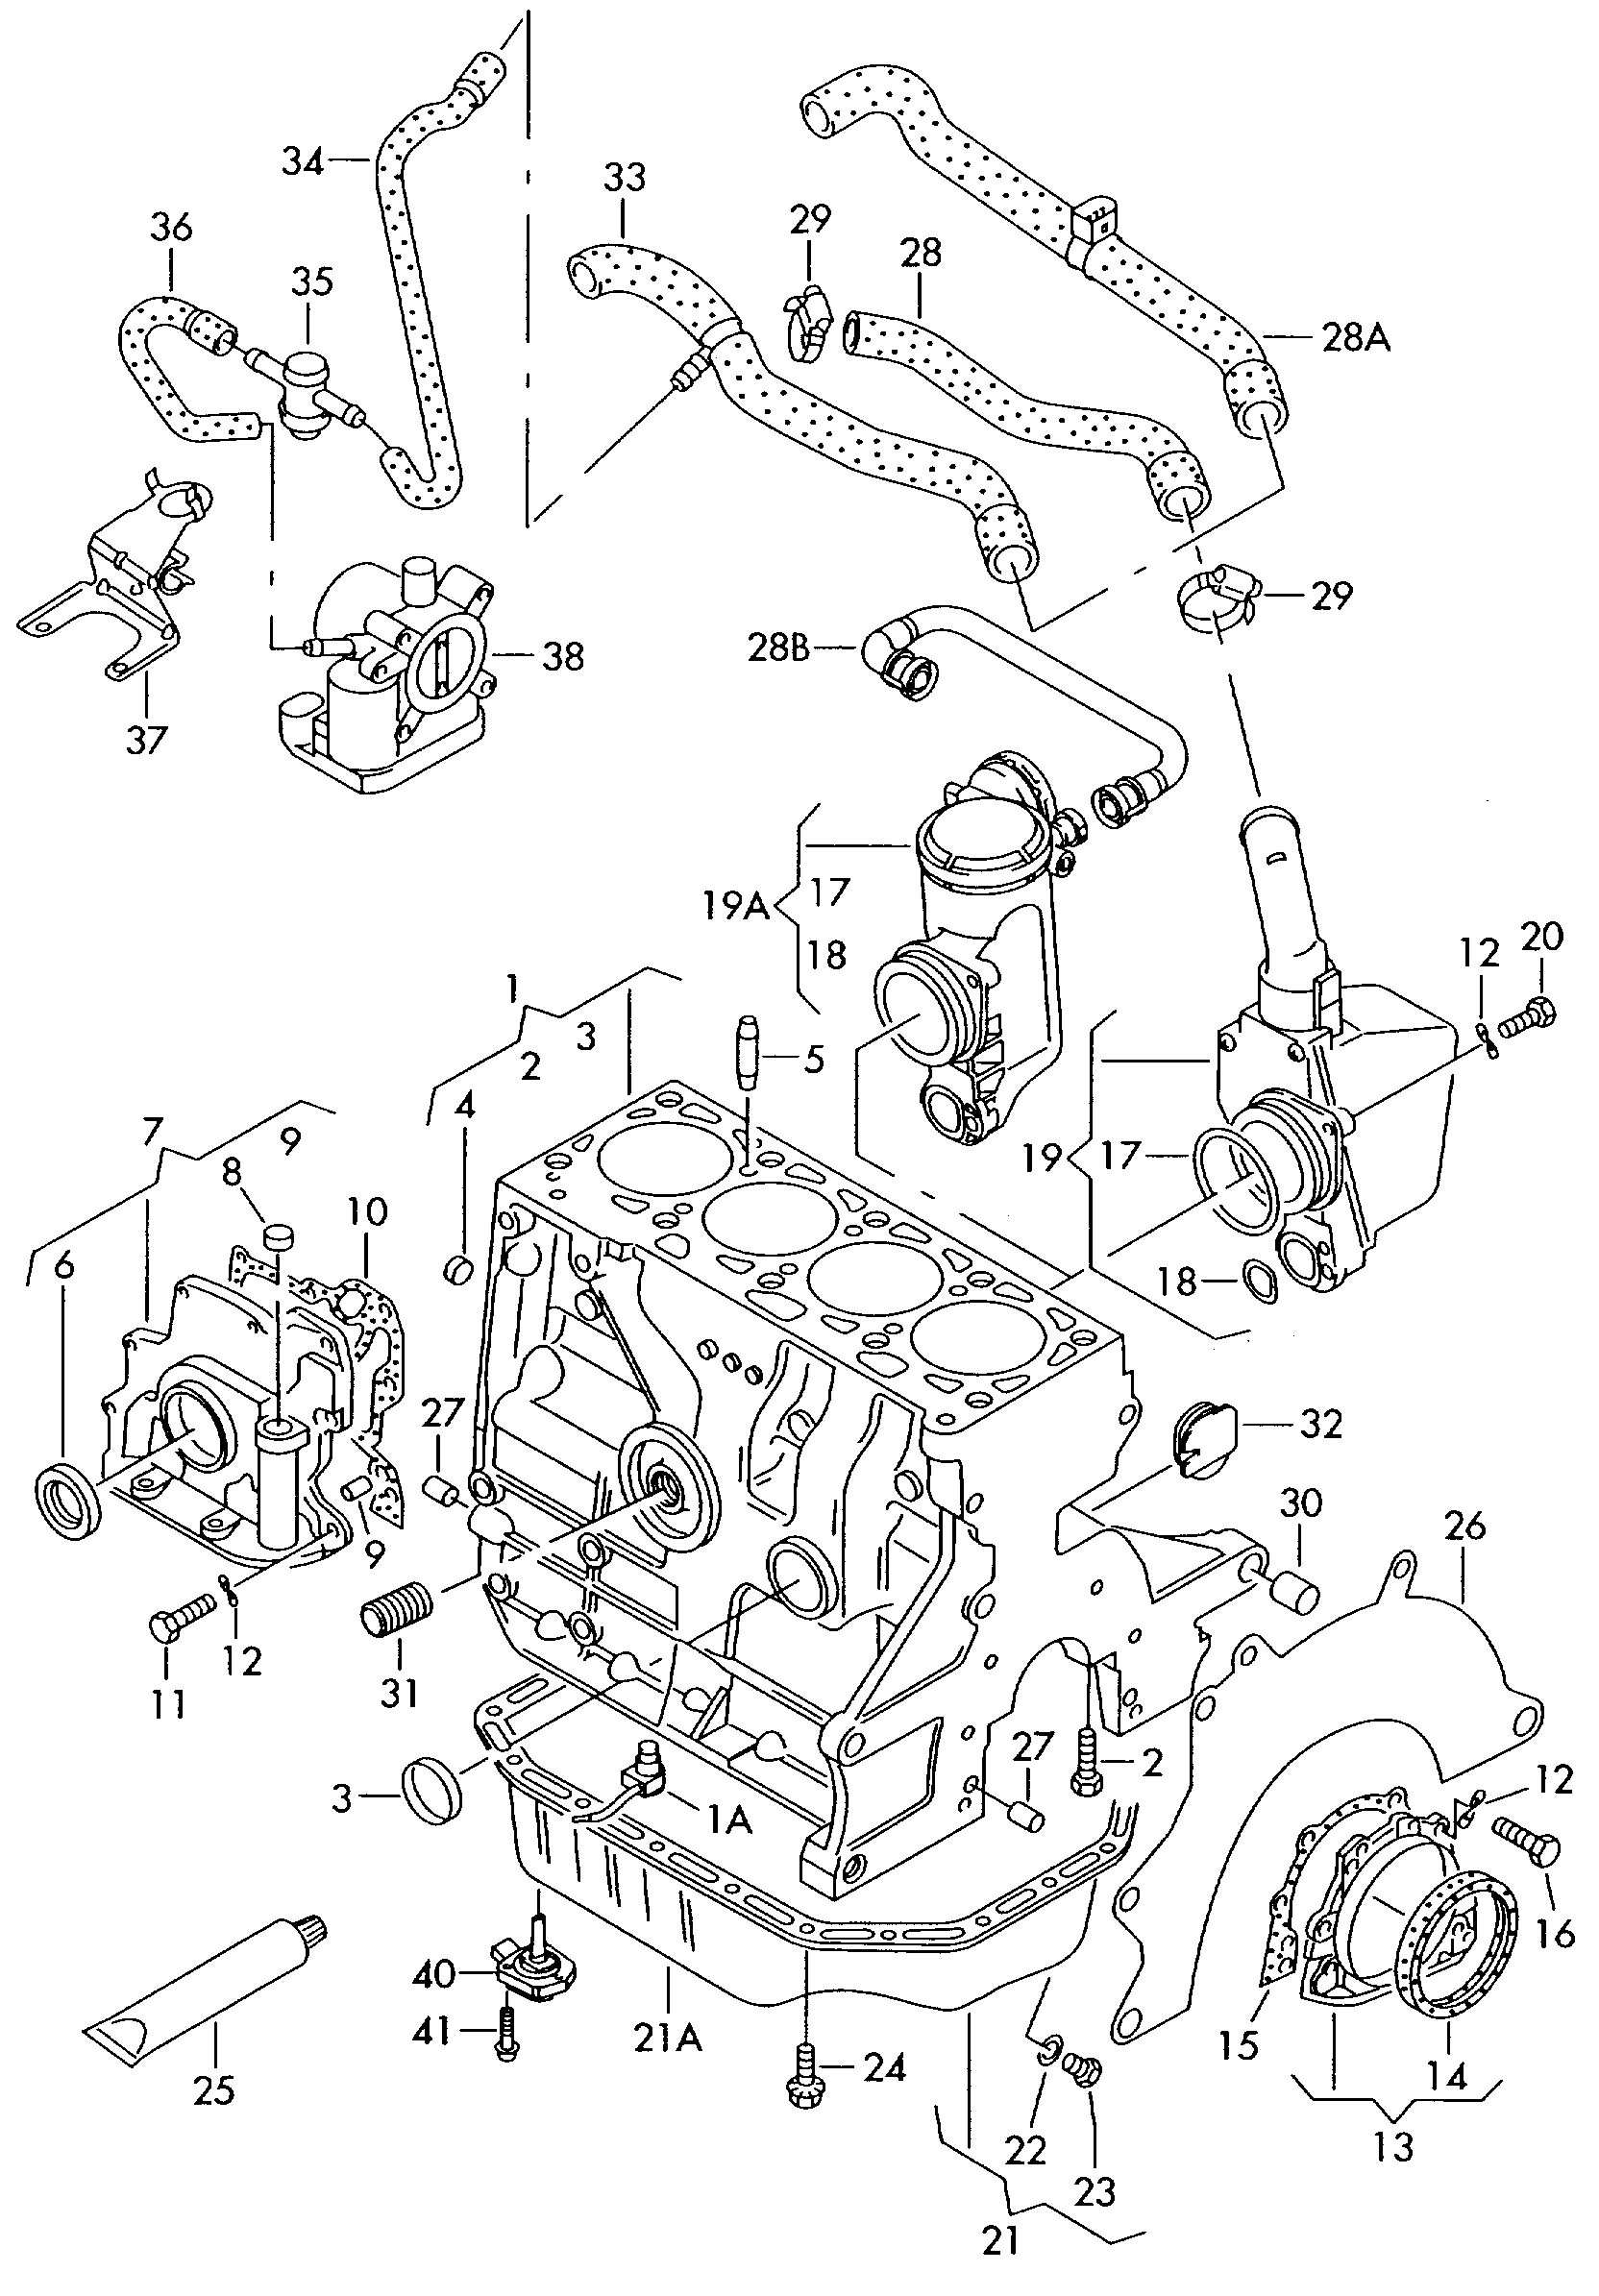 cylinder block with pistons; oil sump - Octavia(OCT)  